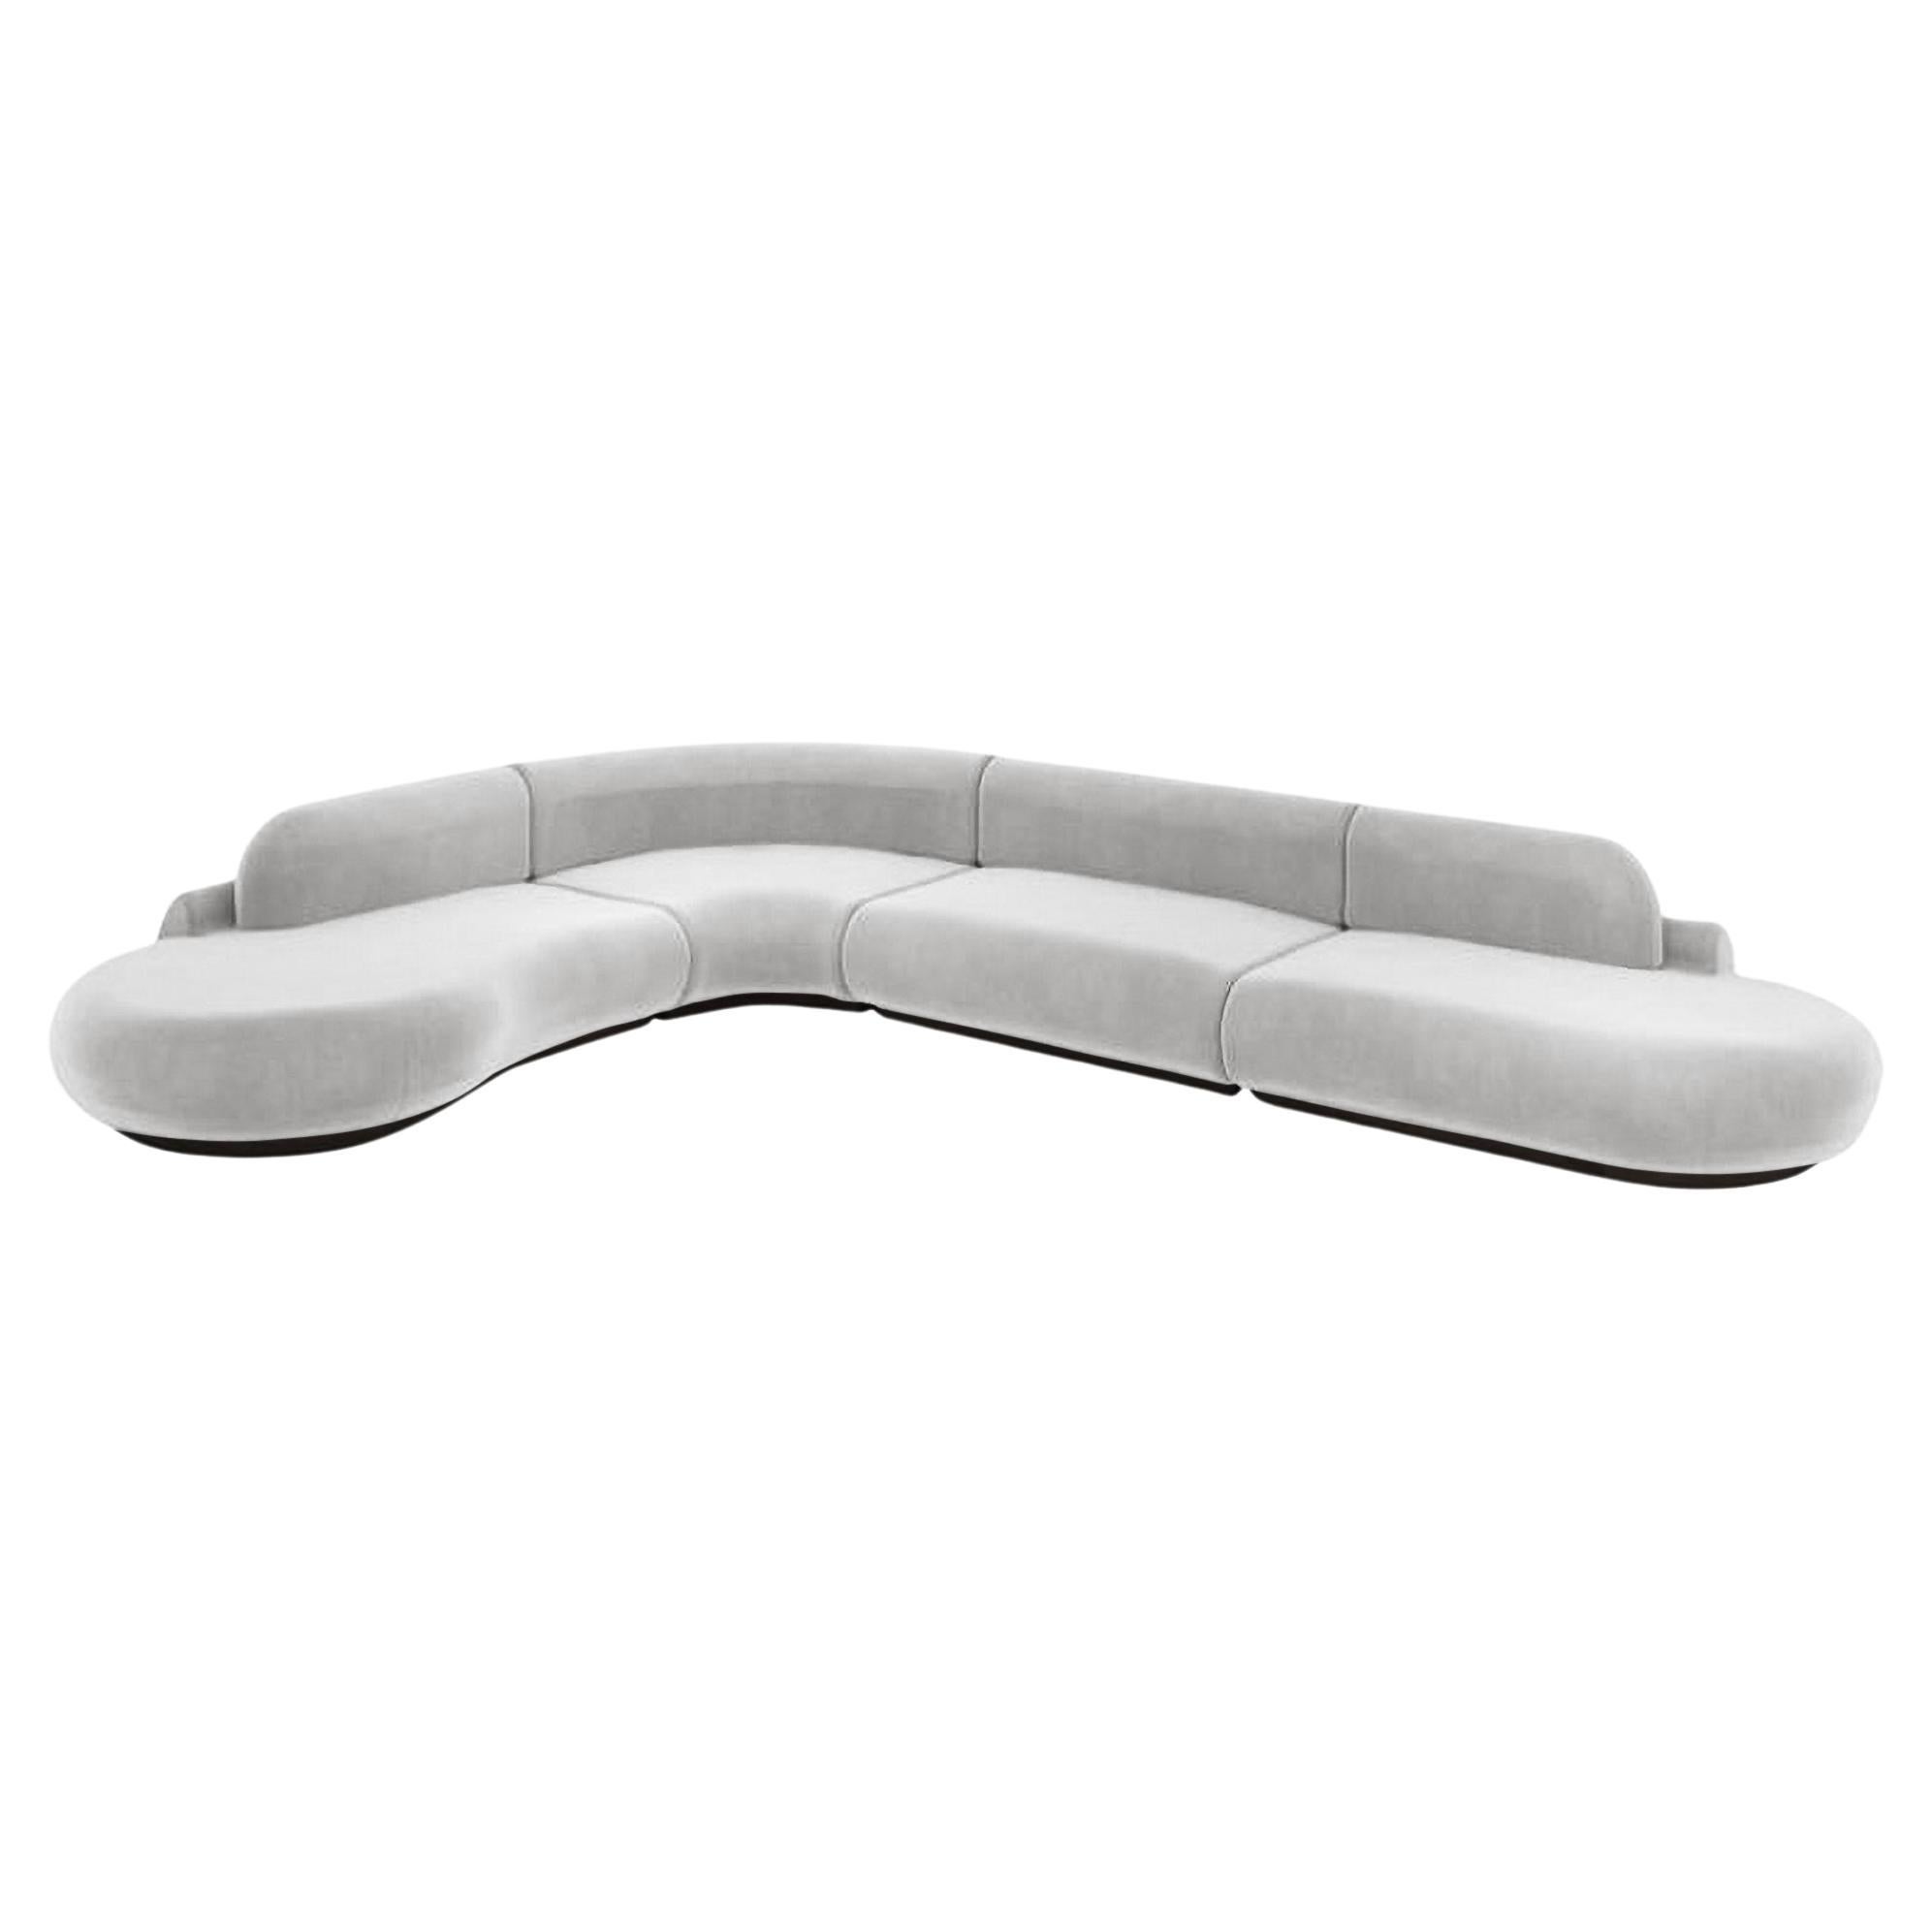 Naked Curved Sectional Sofa, 4 Piece with Beech Ash-056-5 and Aluminium For Sale